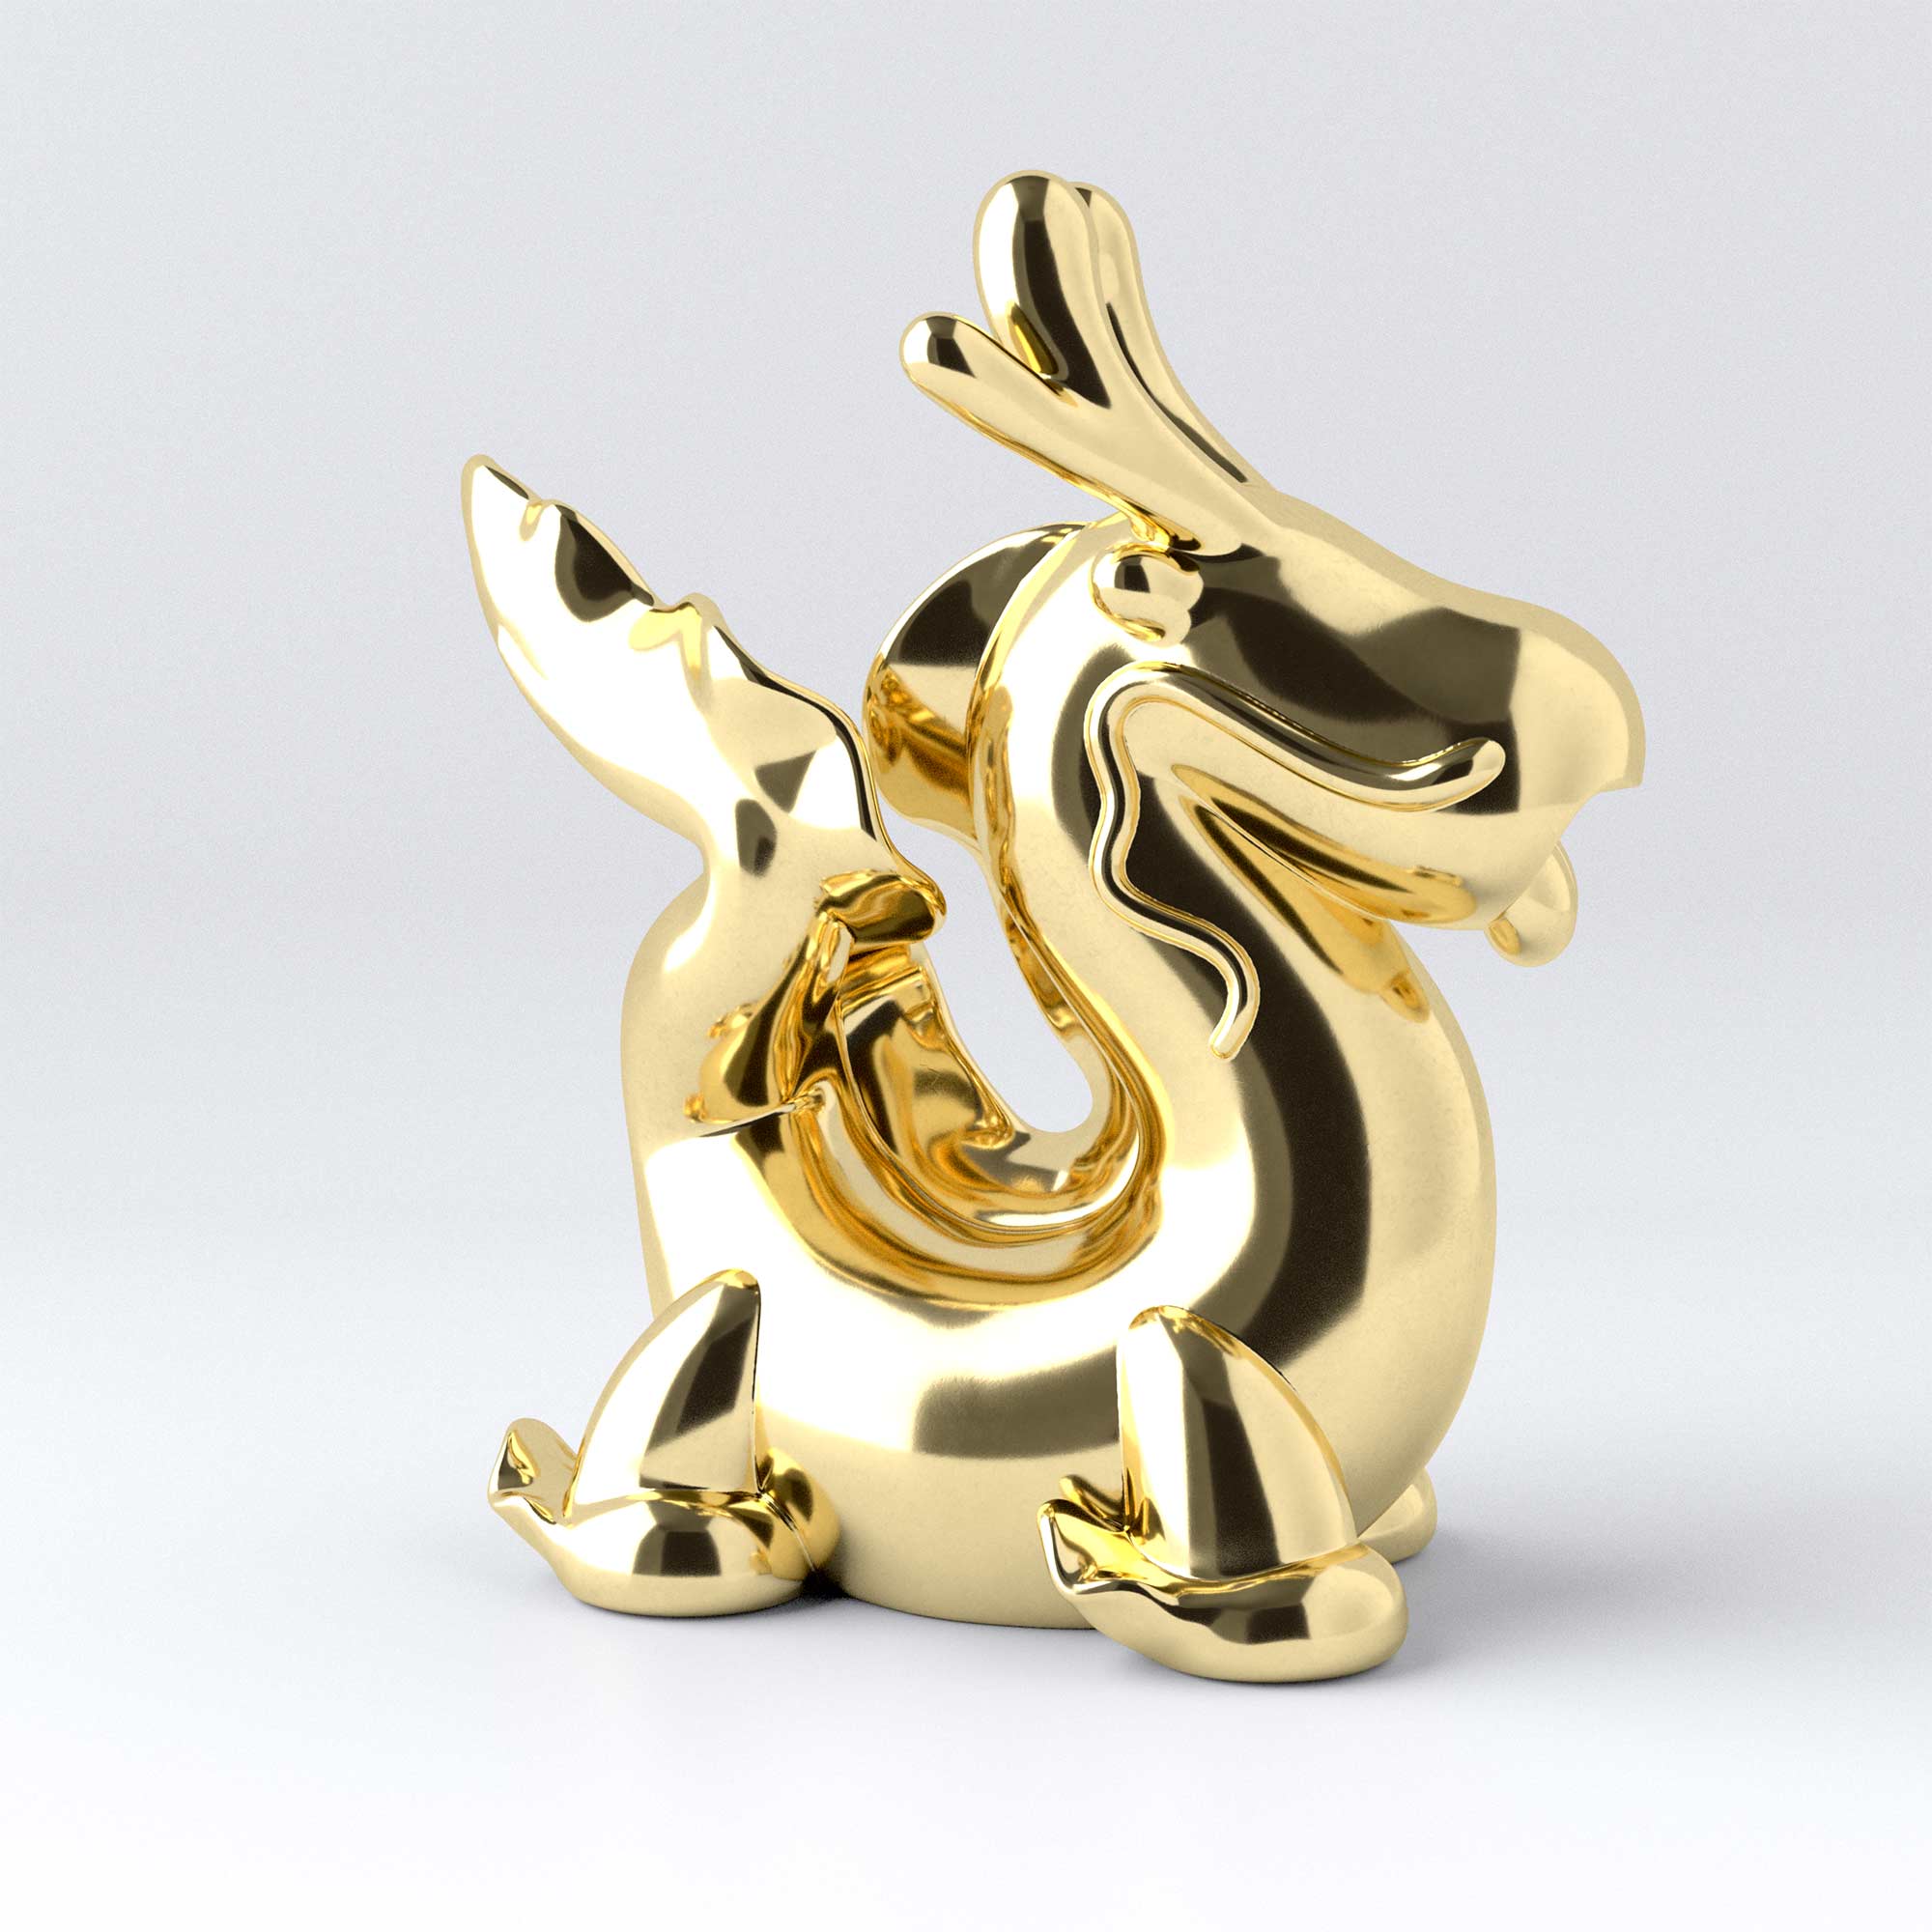 Dragon's Breath stainless steel with gold finish sculpture, limited edition, by Ferdi B Dick. Side view 